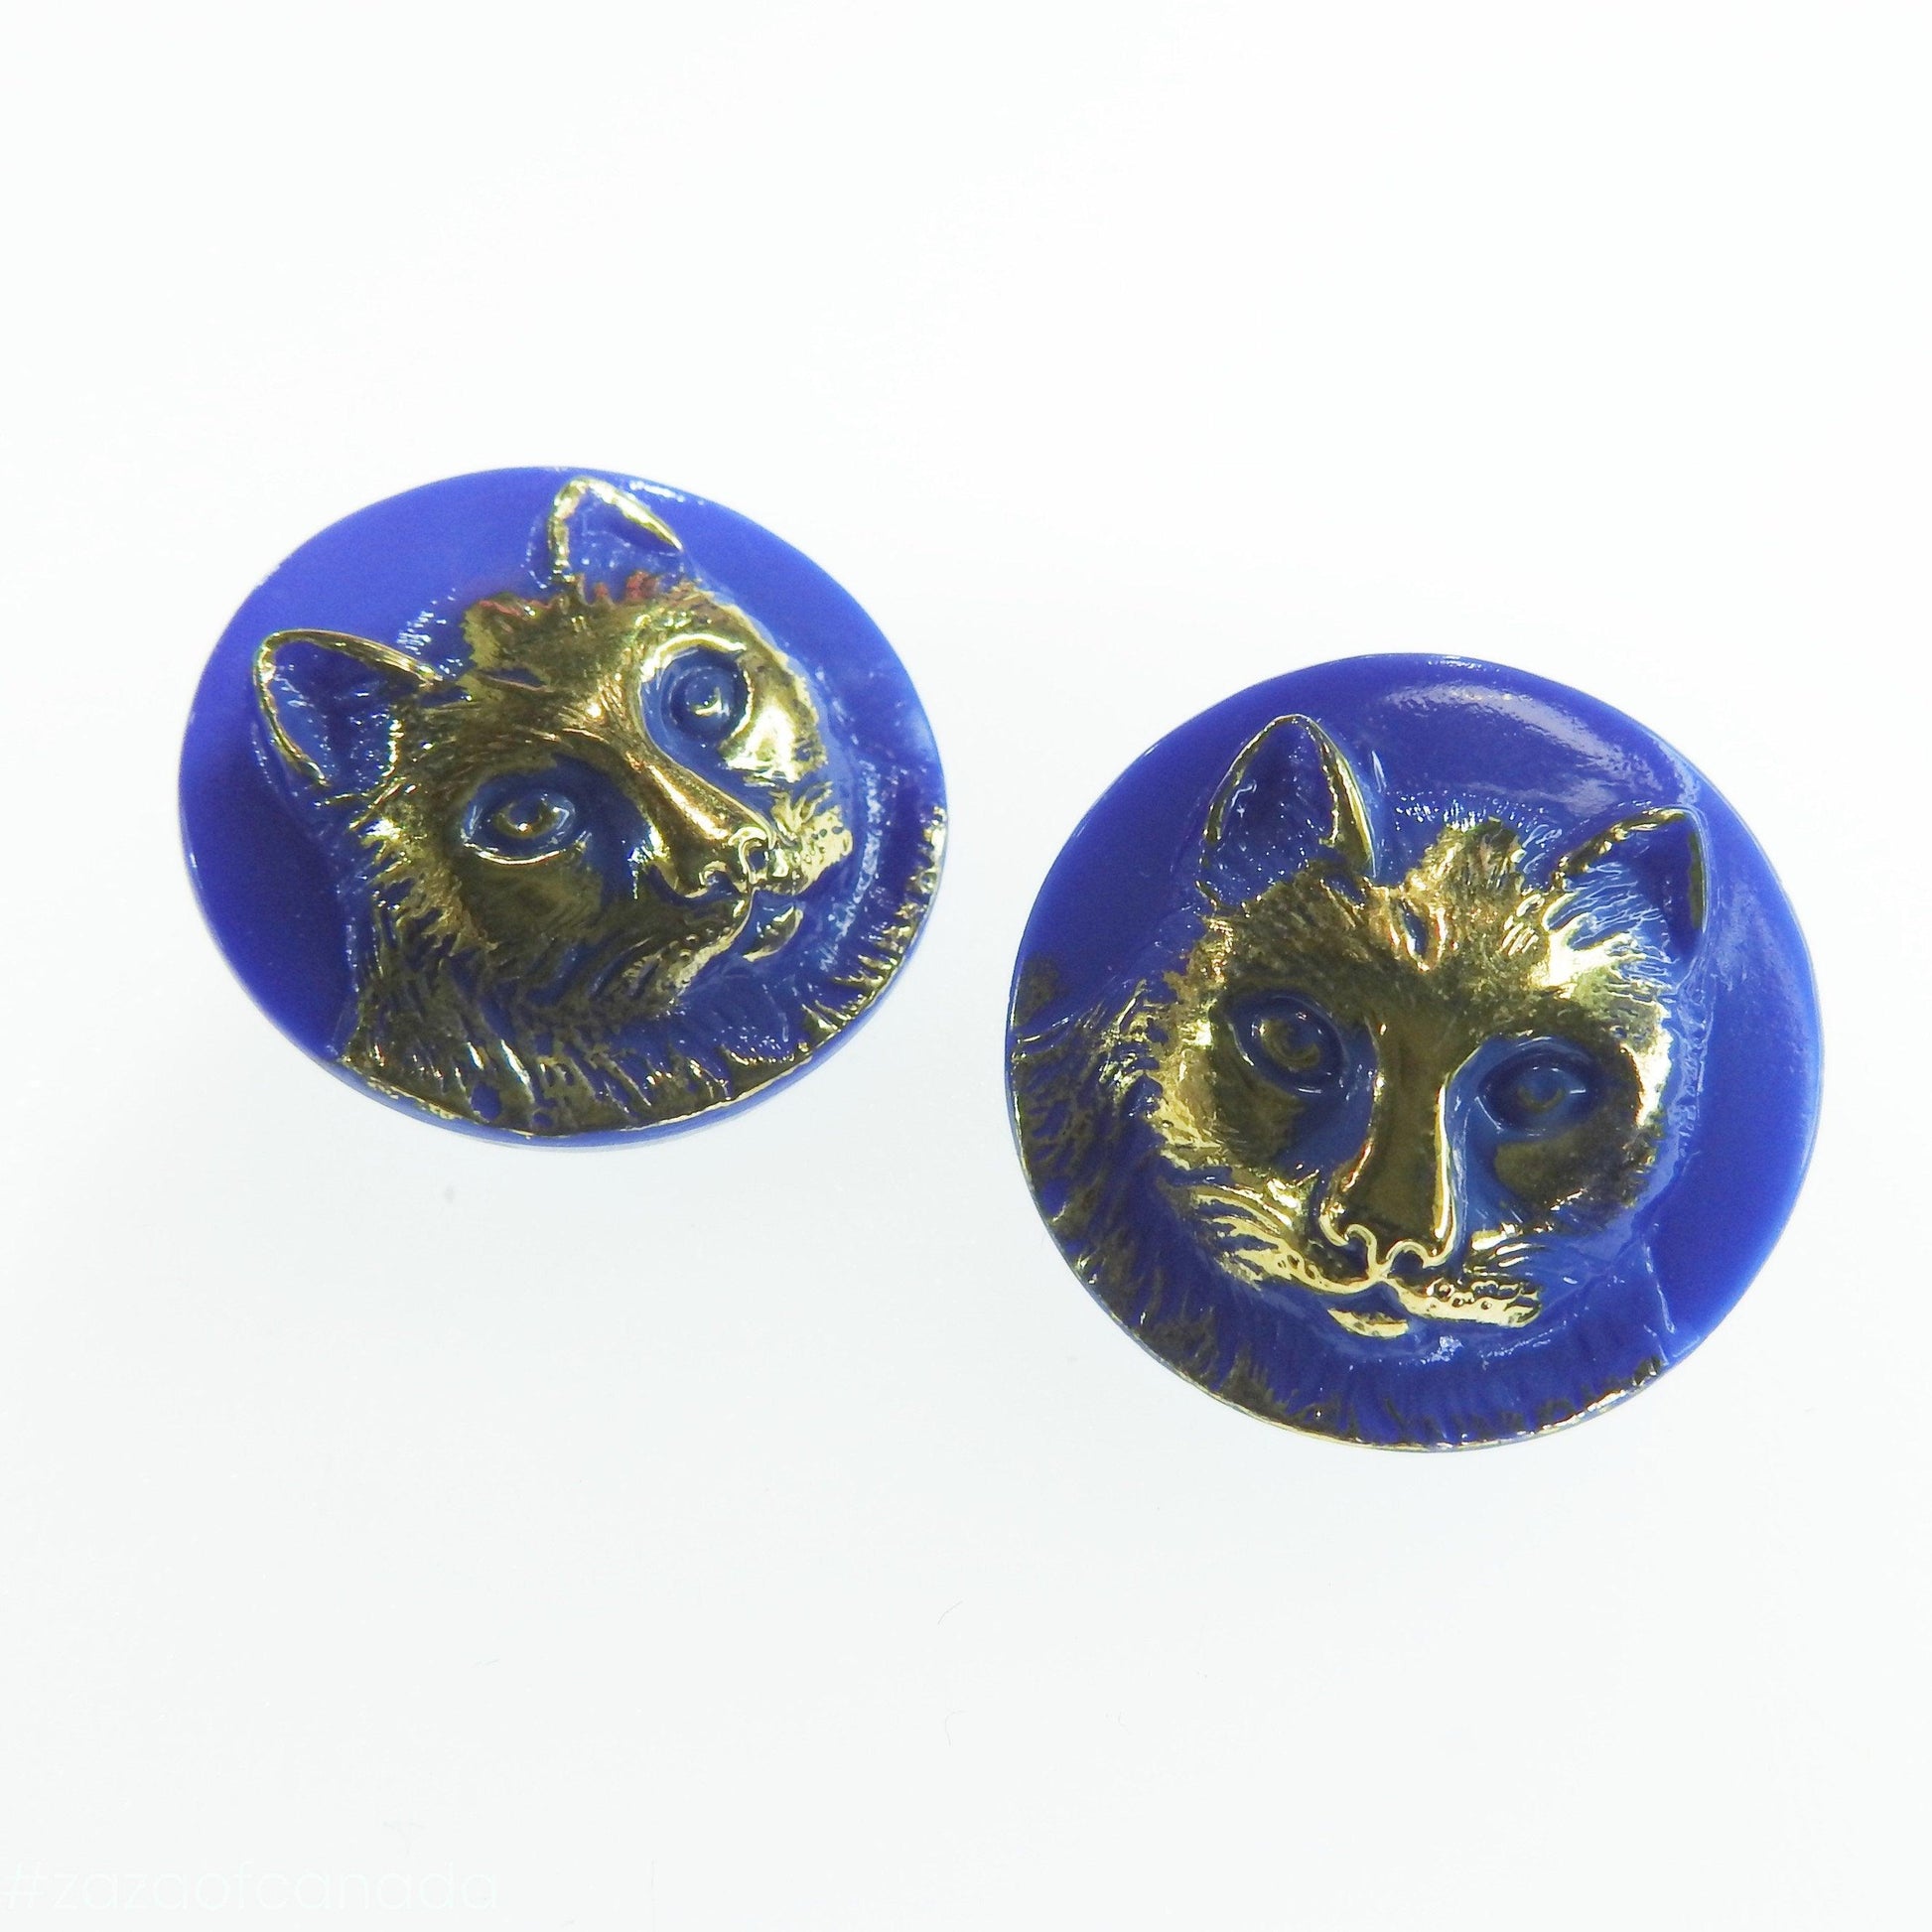 Glass buttons with cat for jewelry making, art project or embellish a tote, blue vintage style gift for cat lover | 20 mm, 0.787”, lot of 2